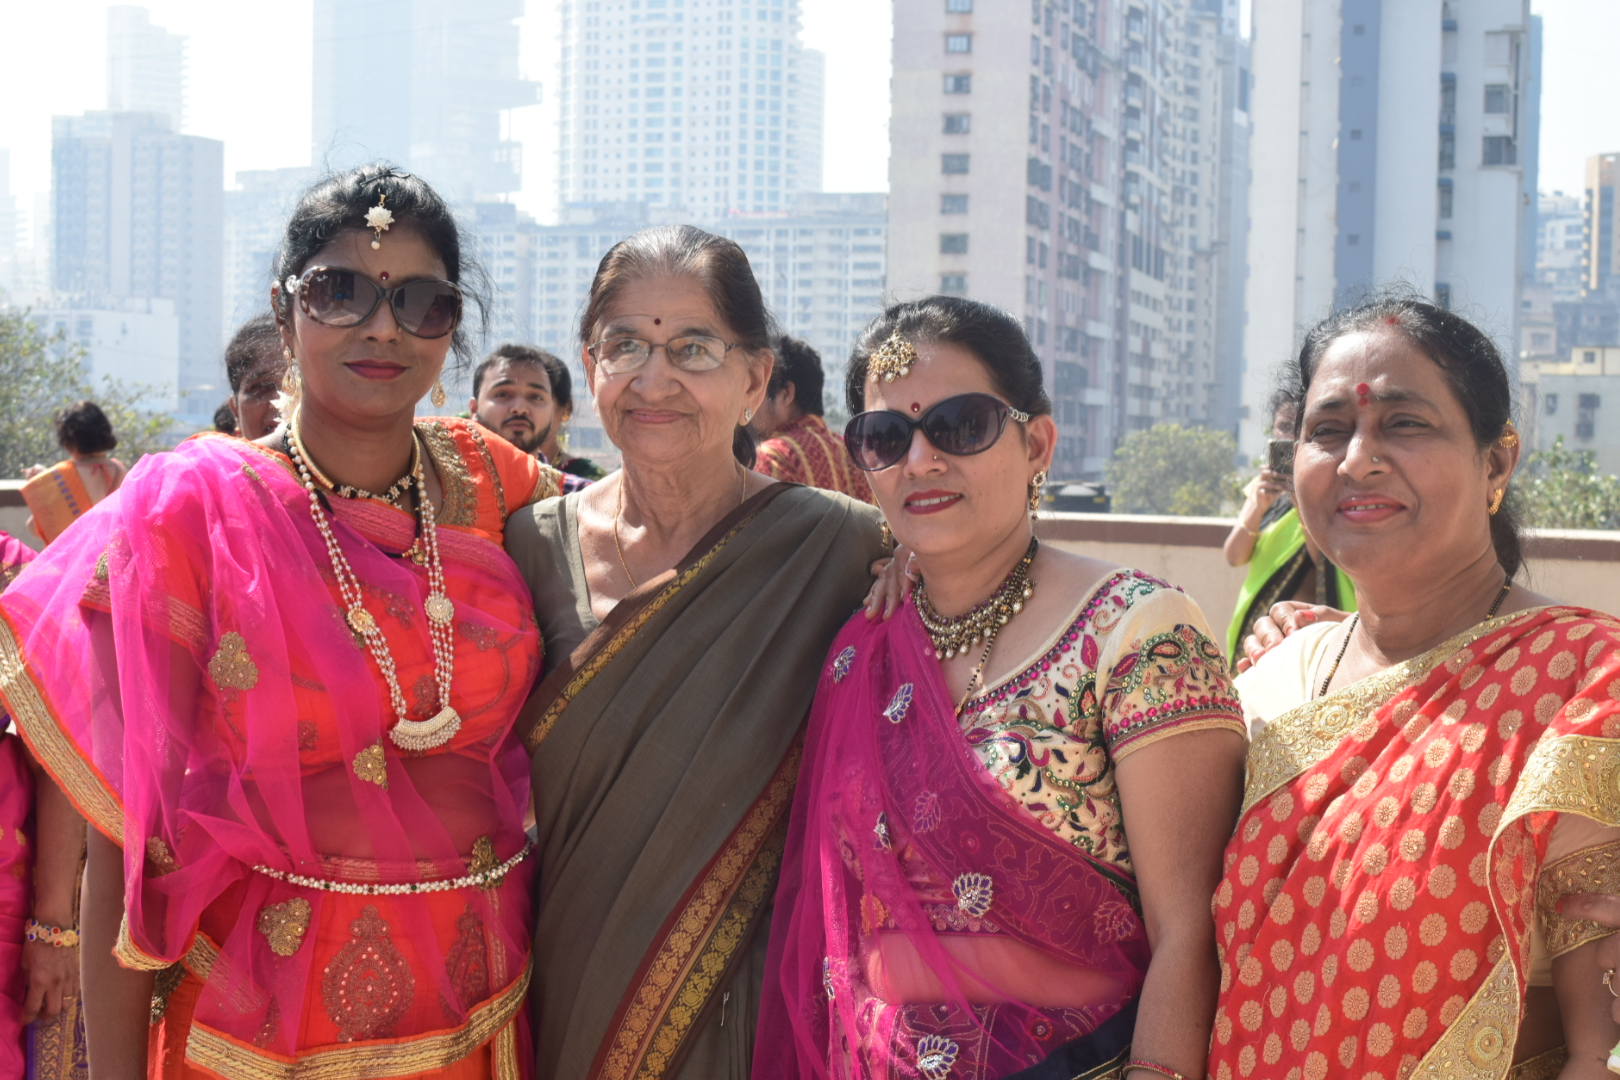 Prabha Mam with a few beneficiaries on the terrace during a kite flying event.